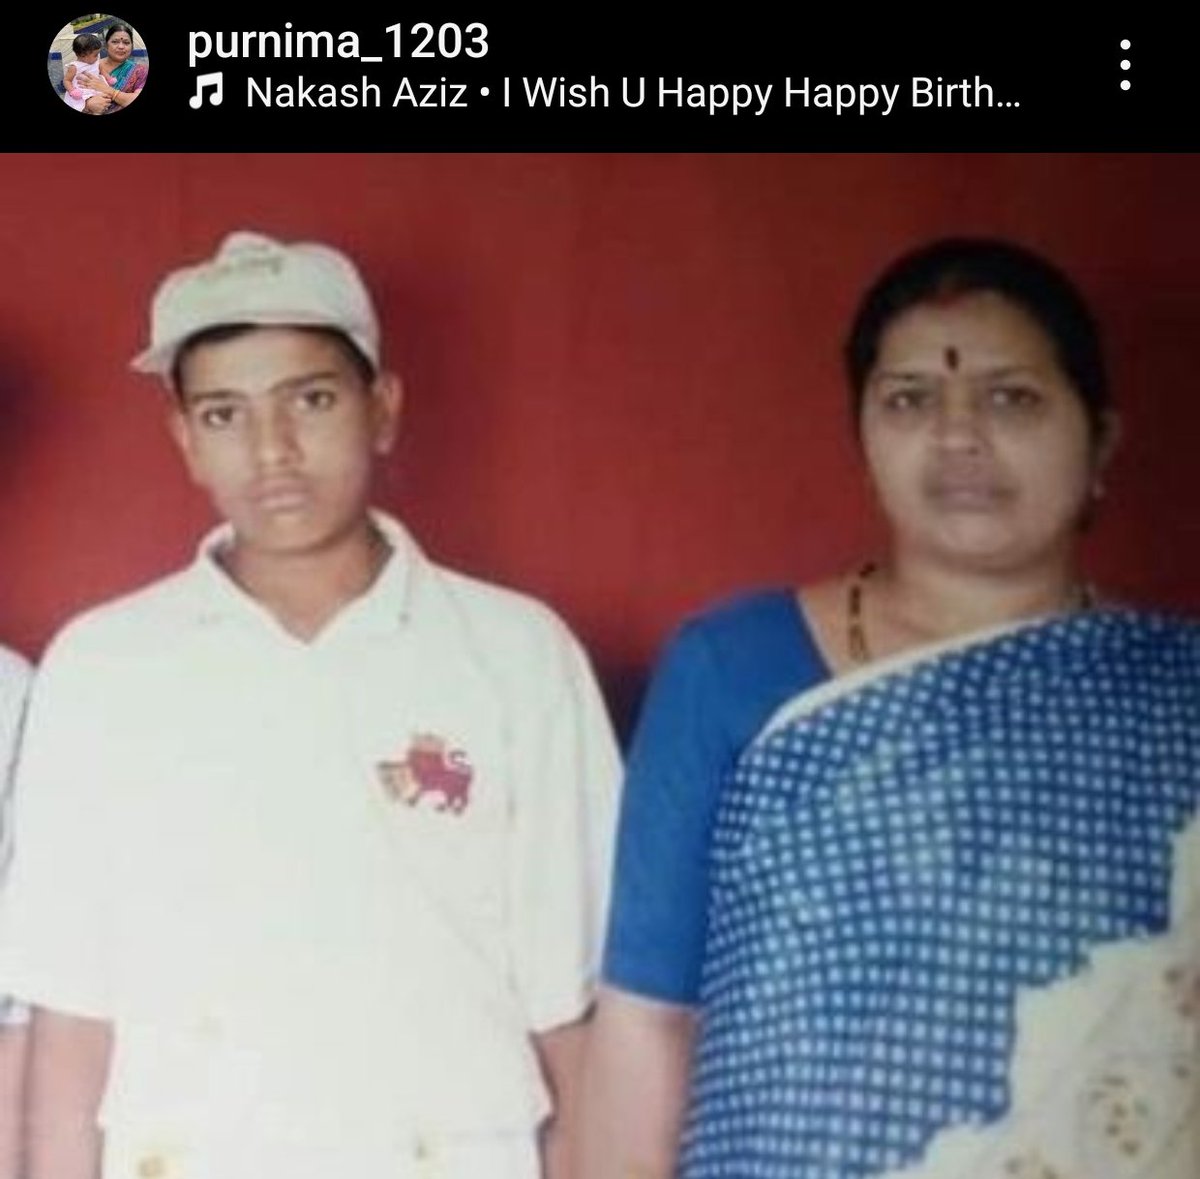 A cute picture of Young Rohit Sharma shared by his mother on birthday 👌